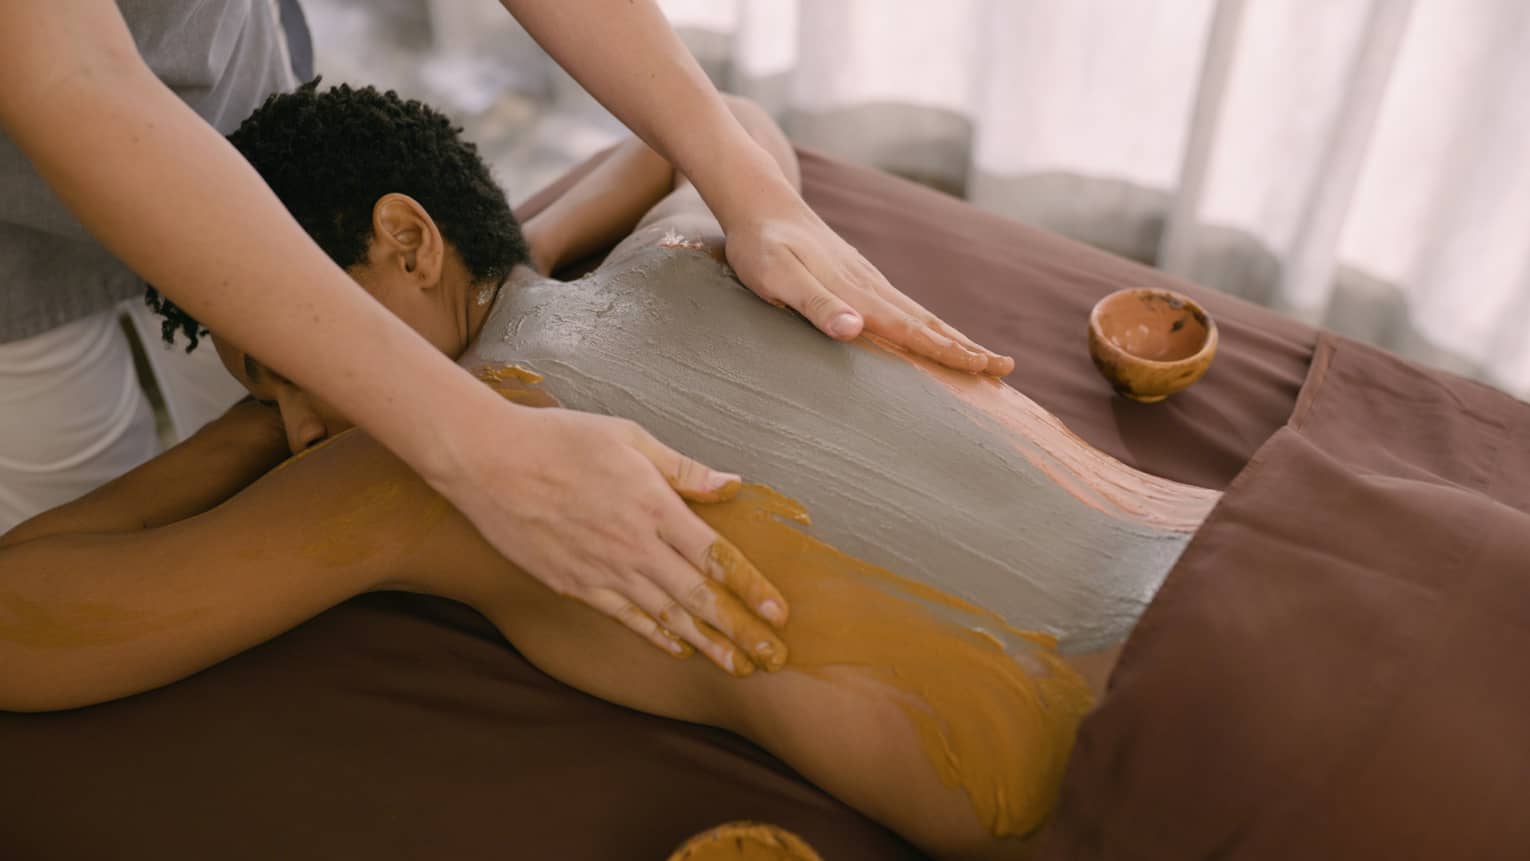 Hands rub clay across person's back as they lay on massage table